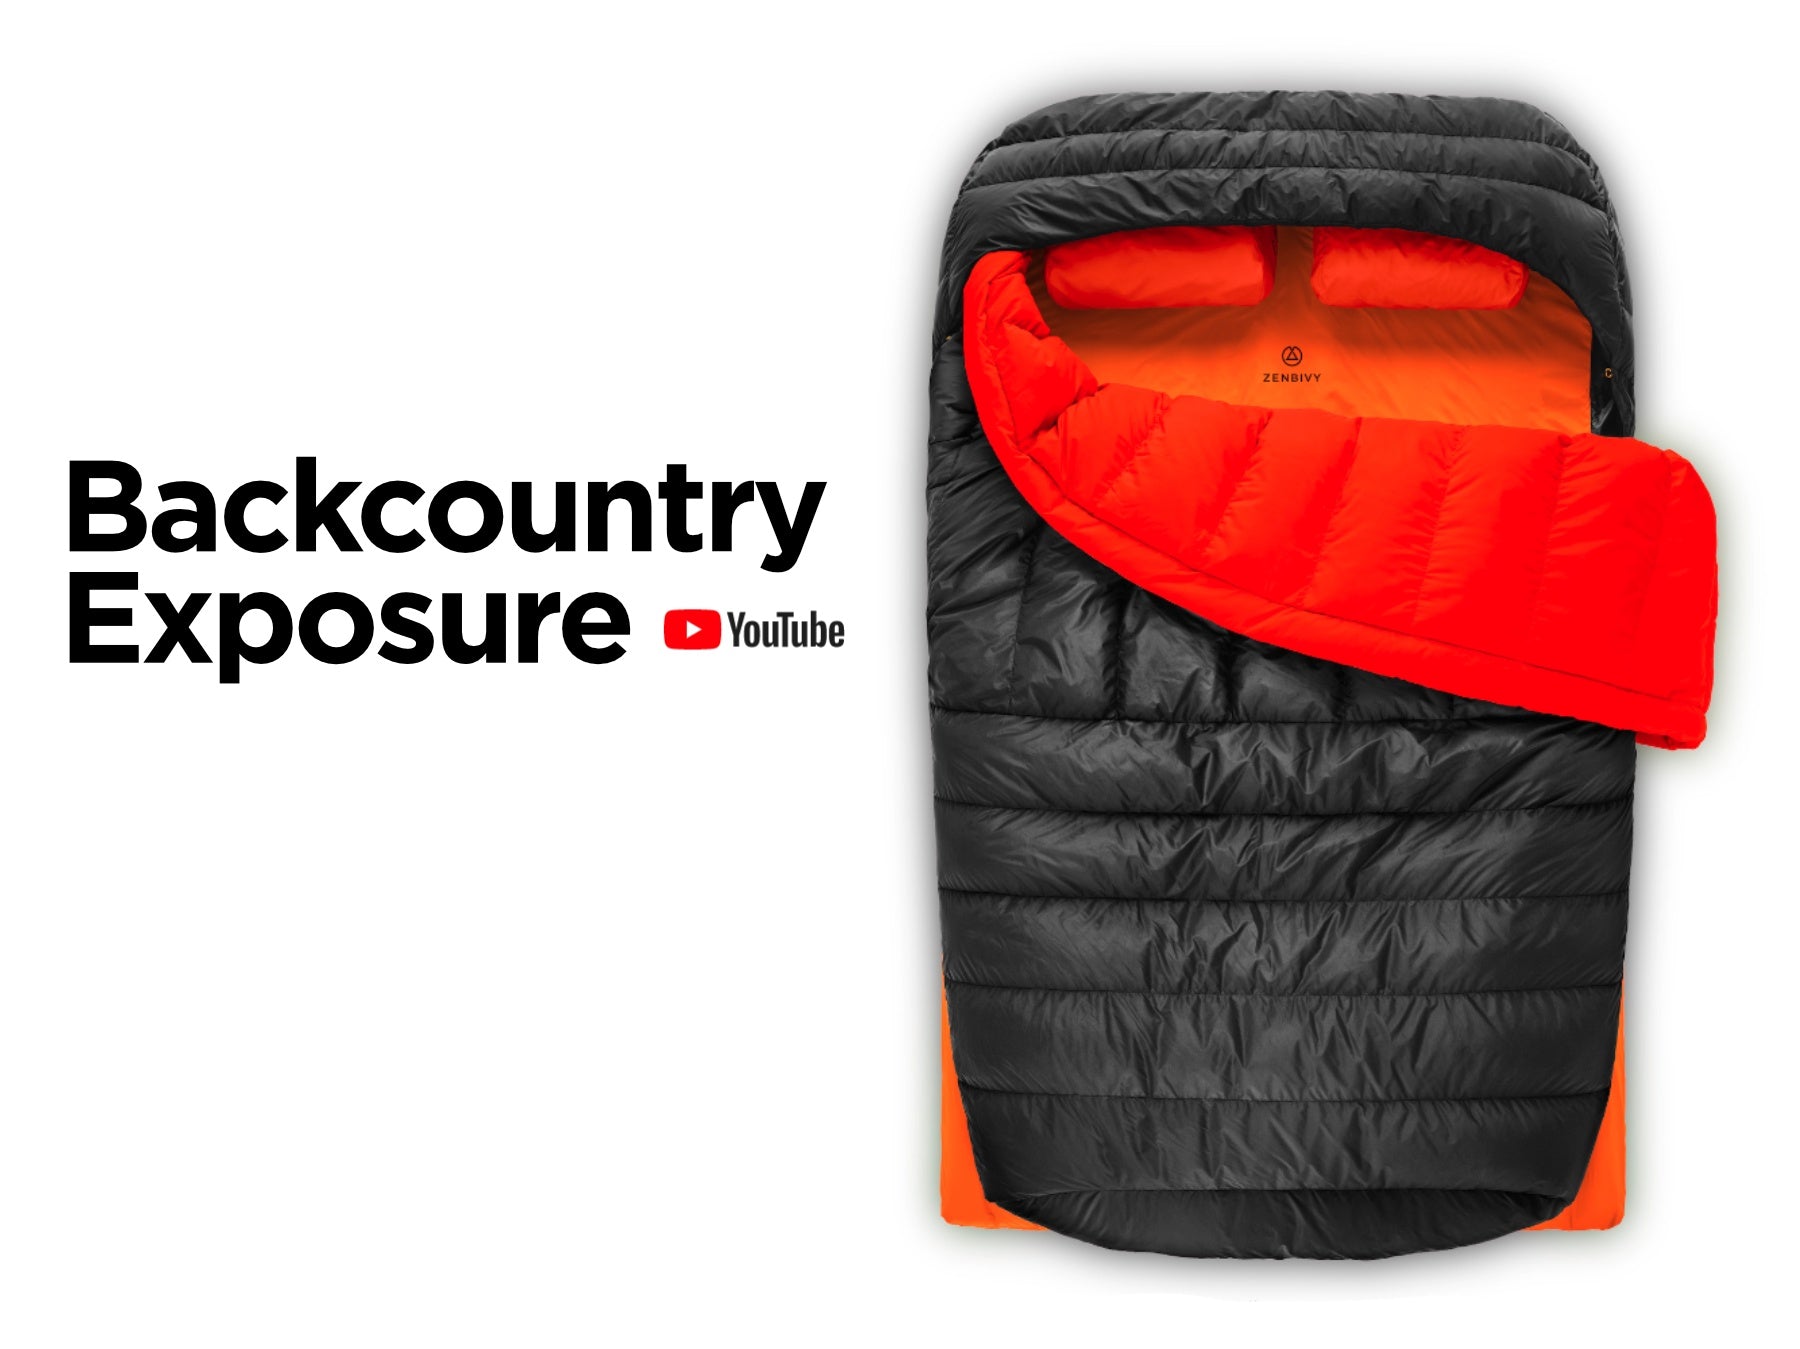 WATCH: Backcountry Exposure's review of the Double Bed